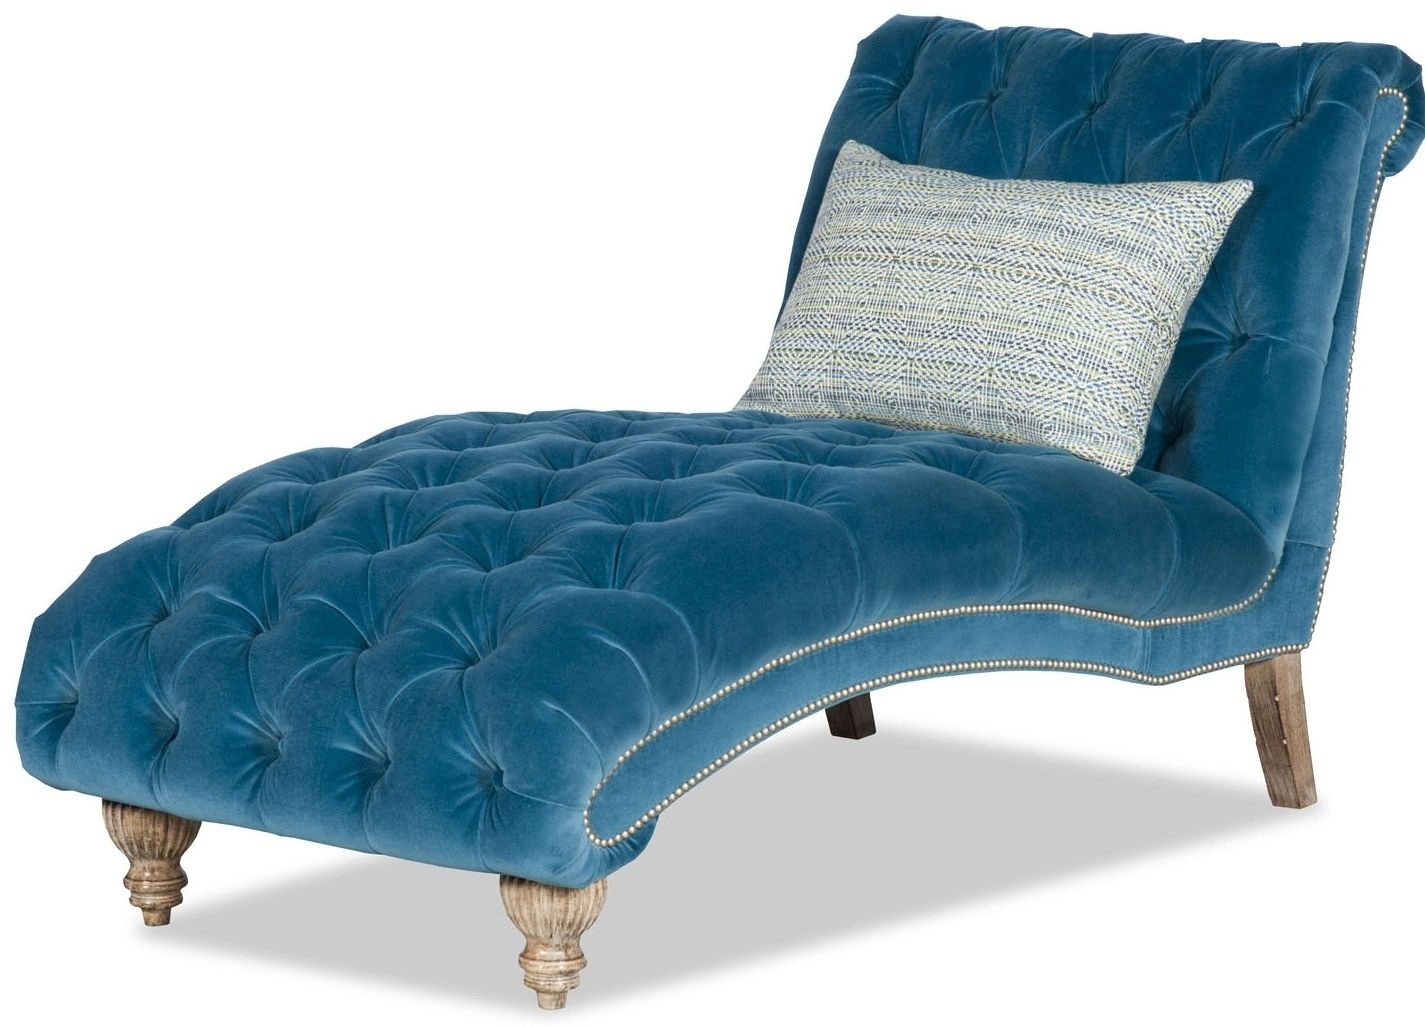 Most Recent Peacock Blue Chaise Lounge Within Blue Chaise Lounges (View 1 of 15)